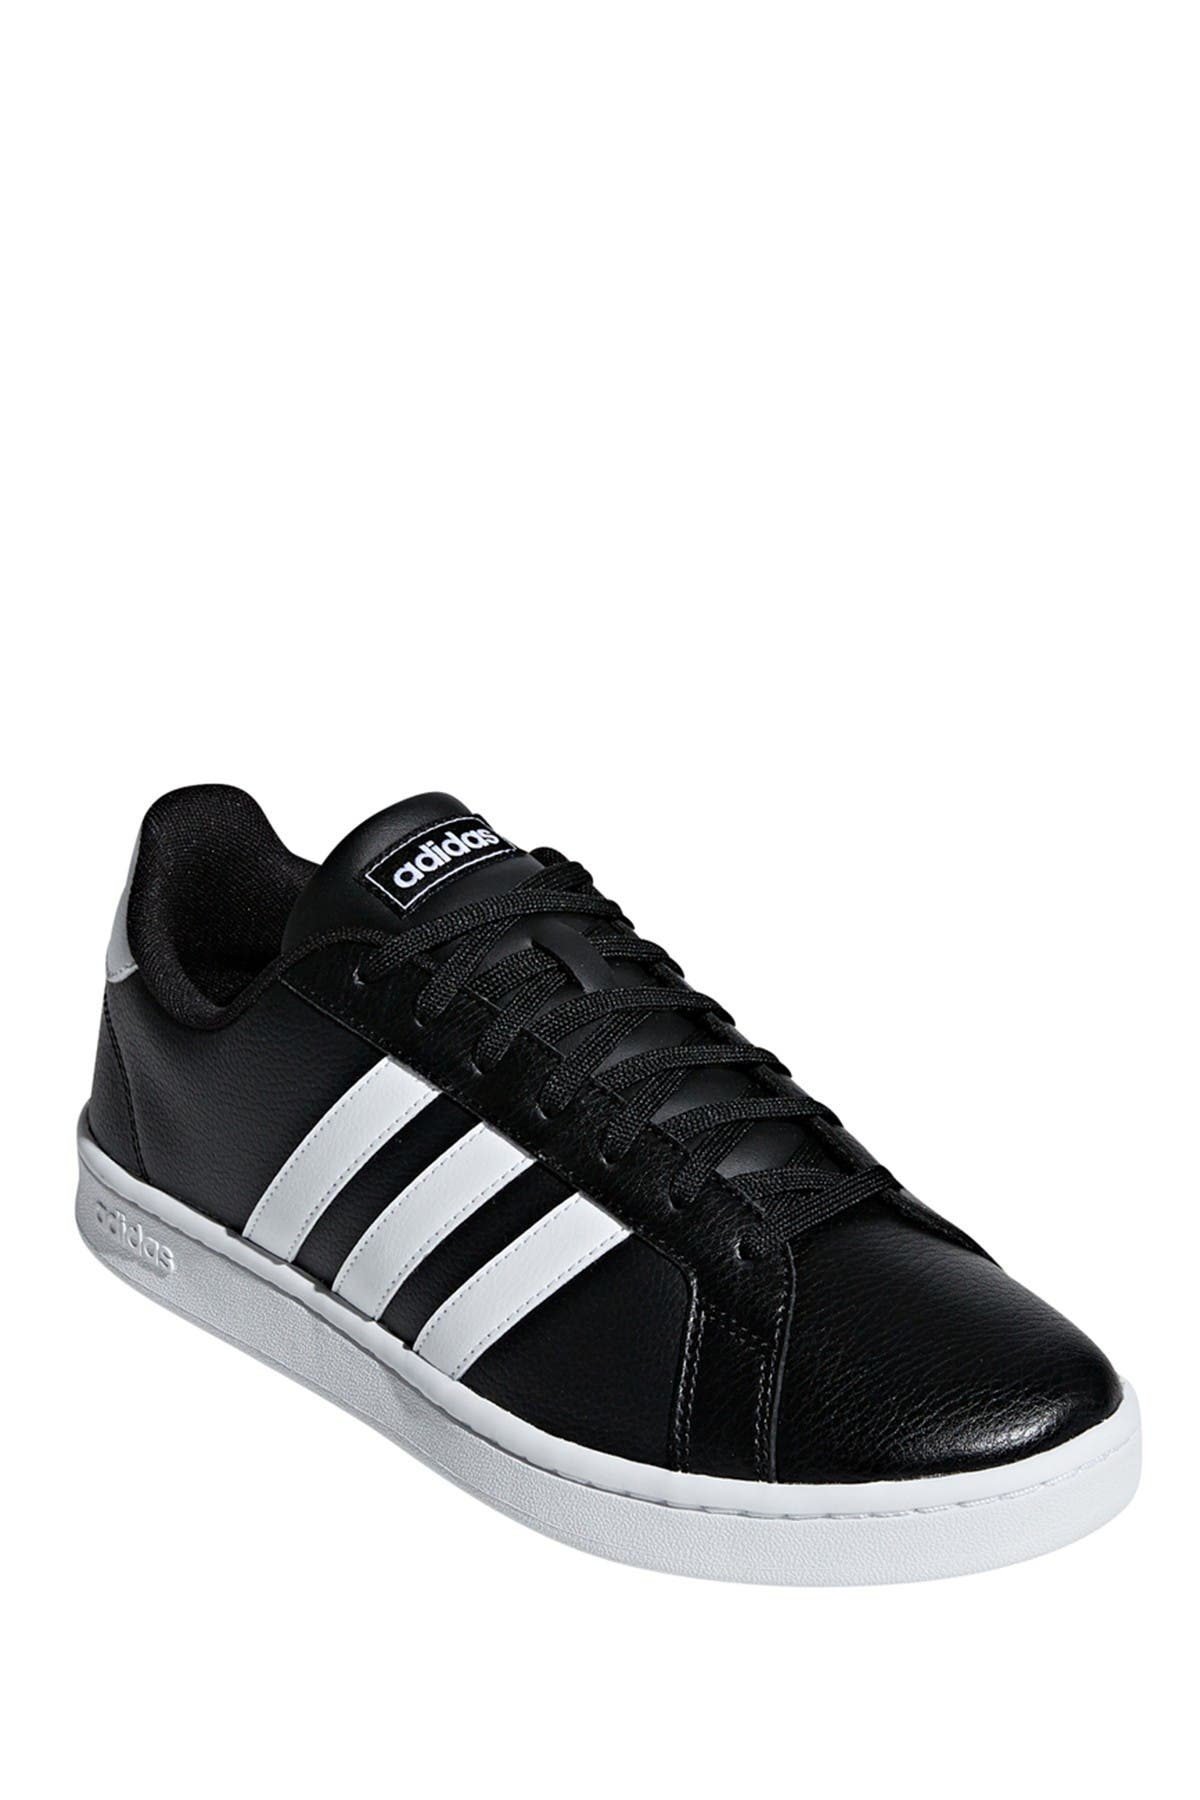 adidas | Grand Court Leather Sneaker | Nordstrom Rack